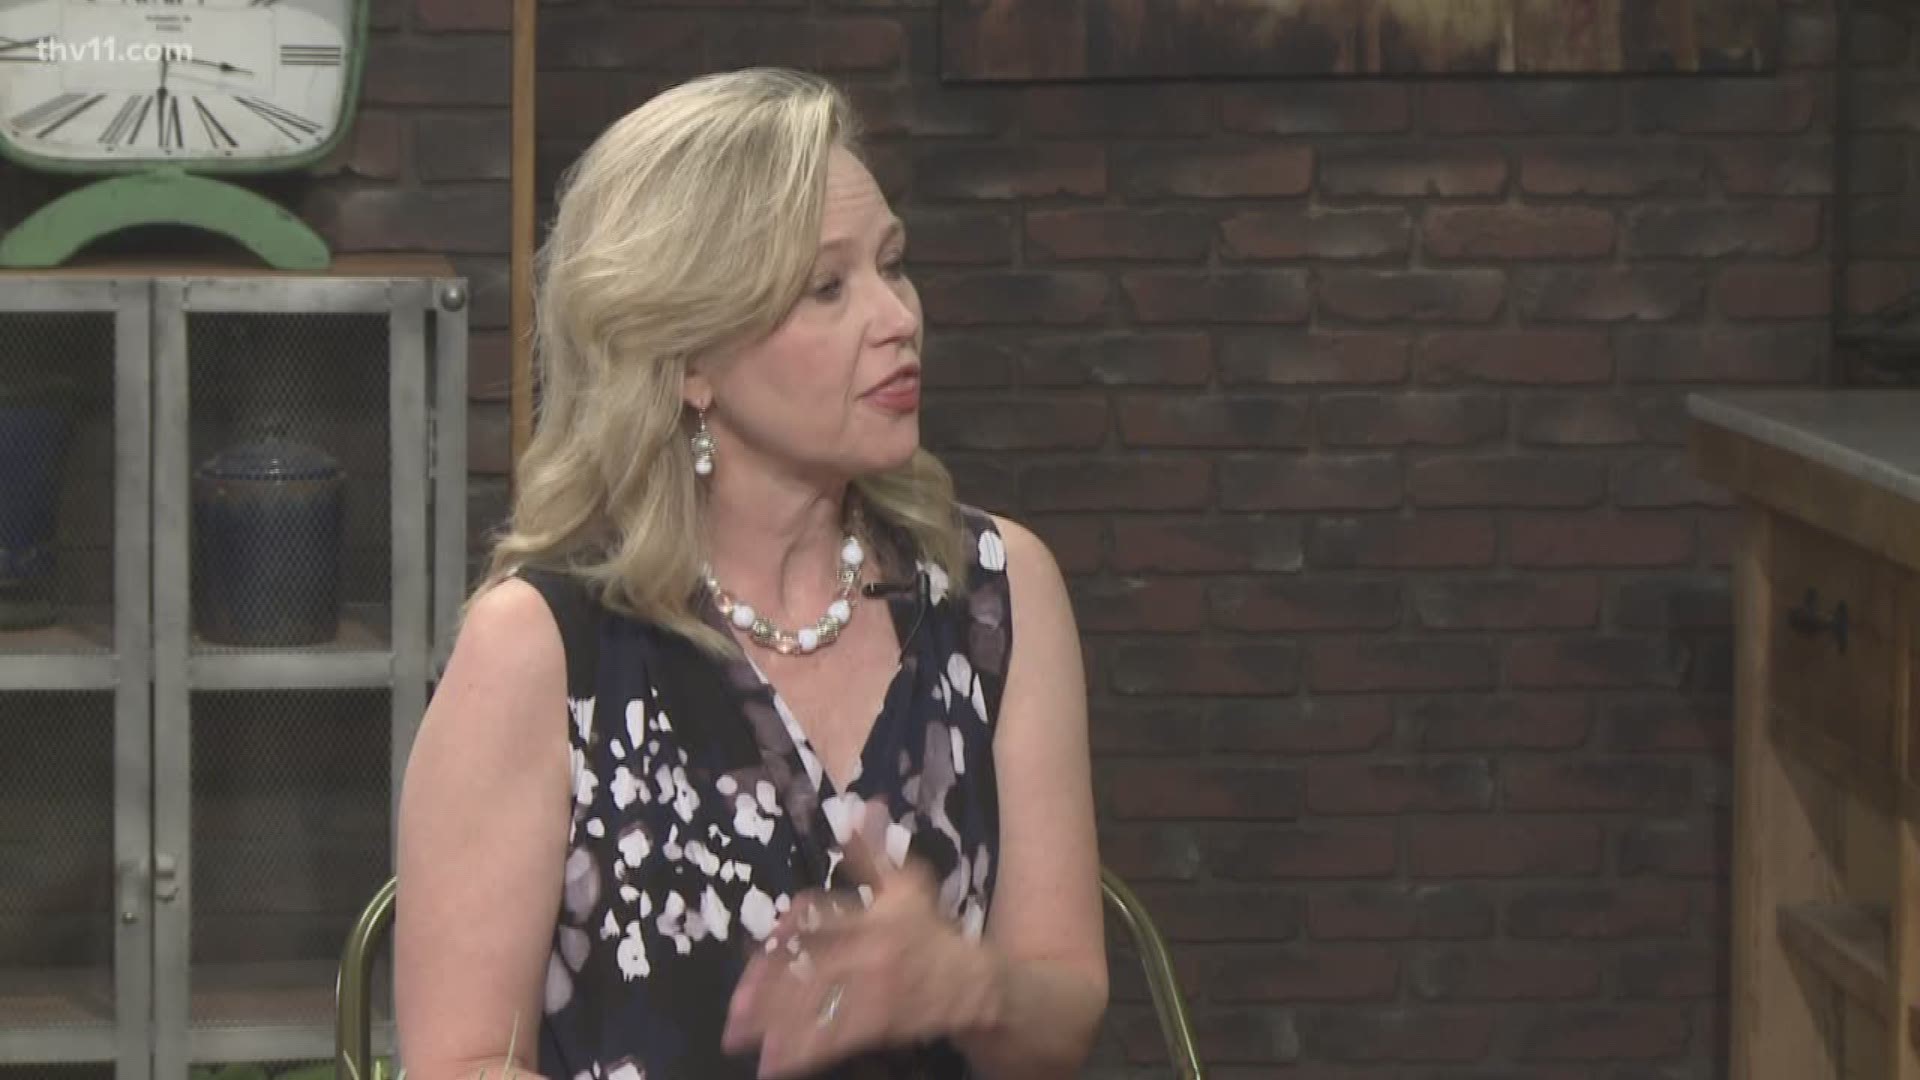 Dr. Chandler explains why Tylenol may be your best bet for pain relief if you might conceive.